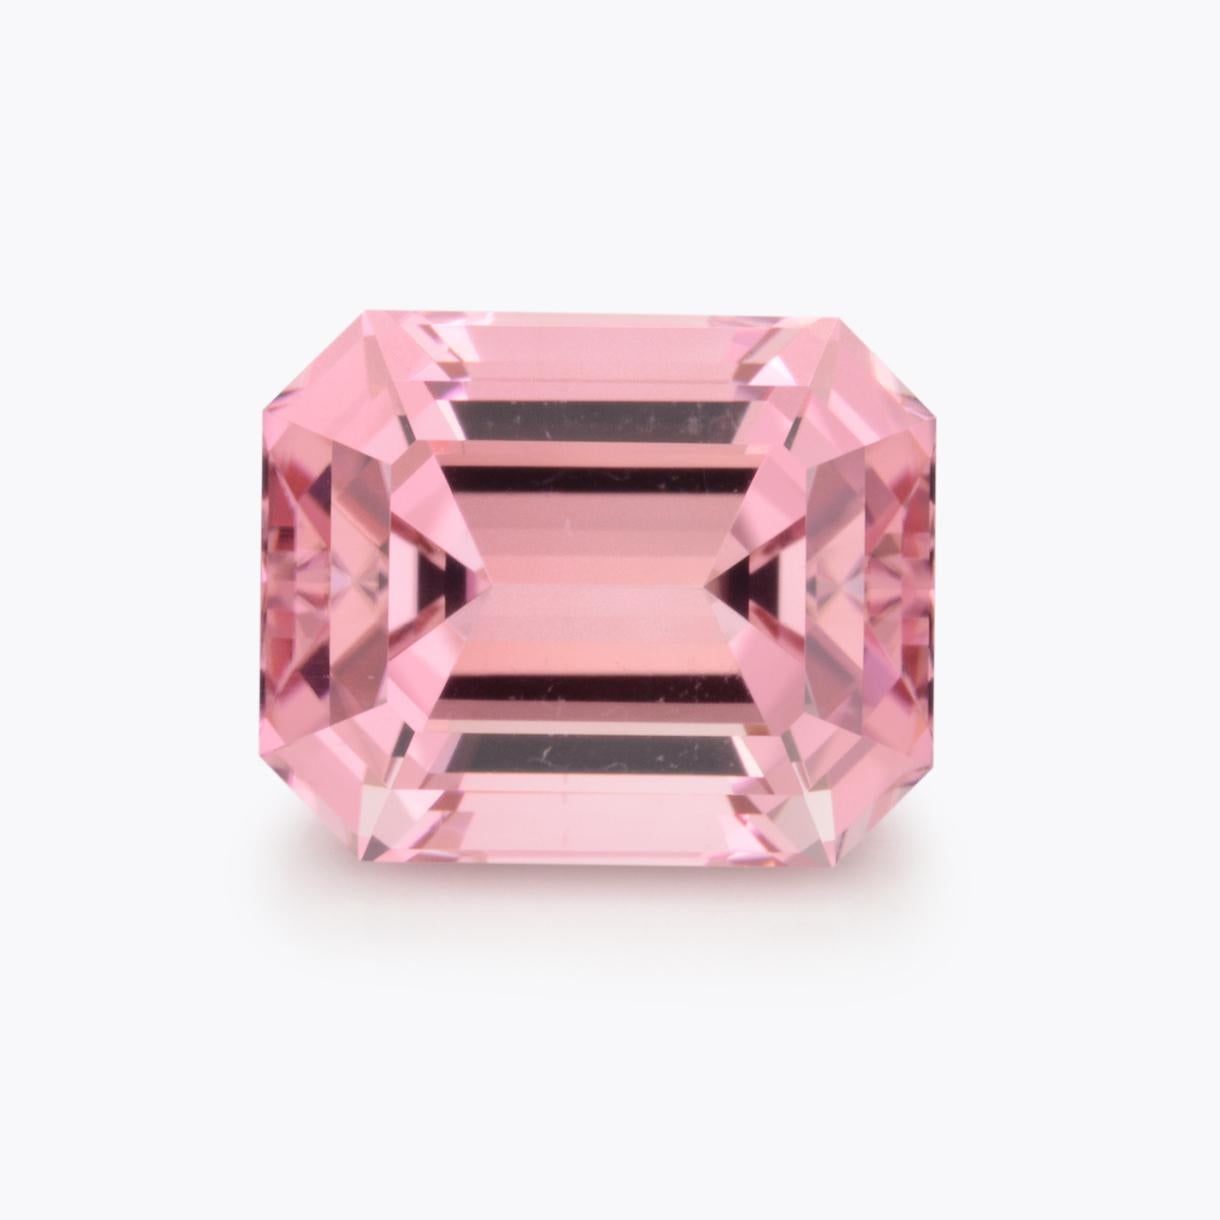 Contemporary Pink Tourmaline Ring Loose Stone 3.41 Carat Unmounted Emerald Cut For Sale